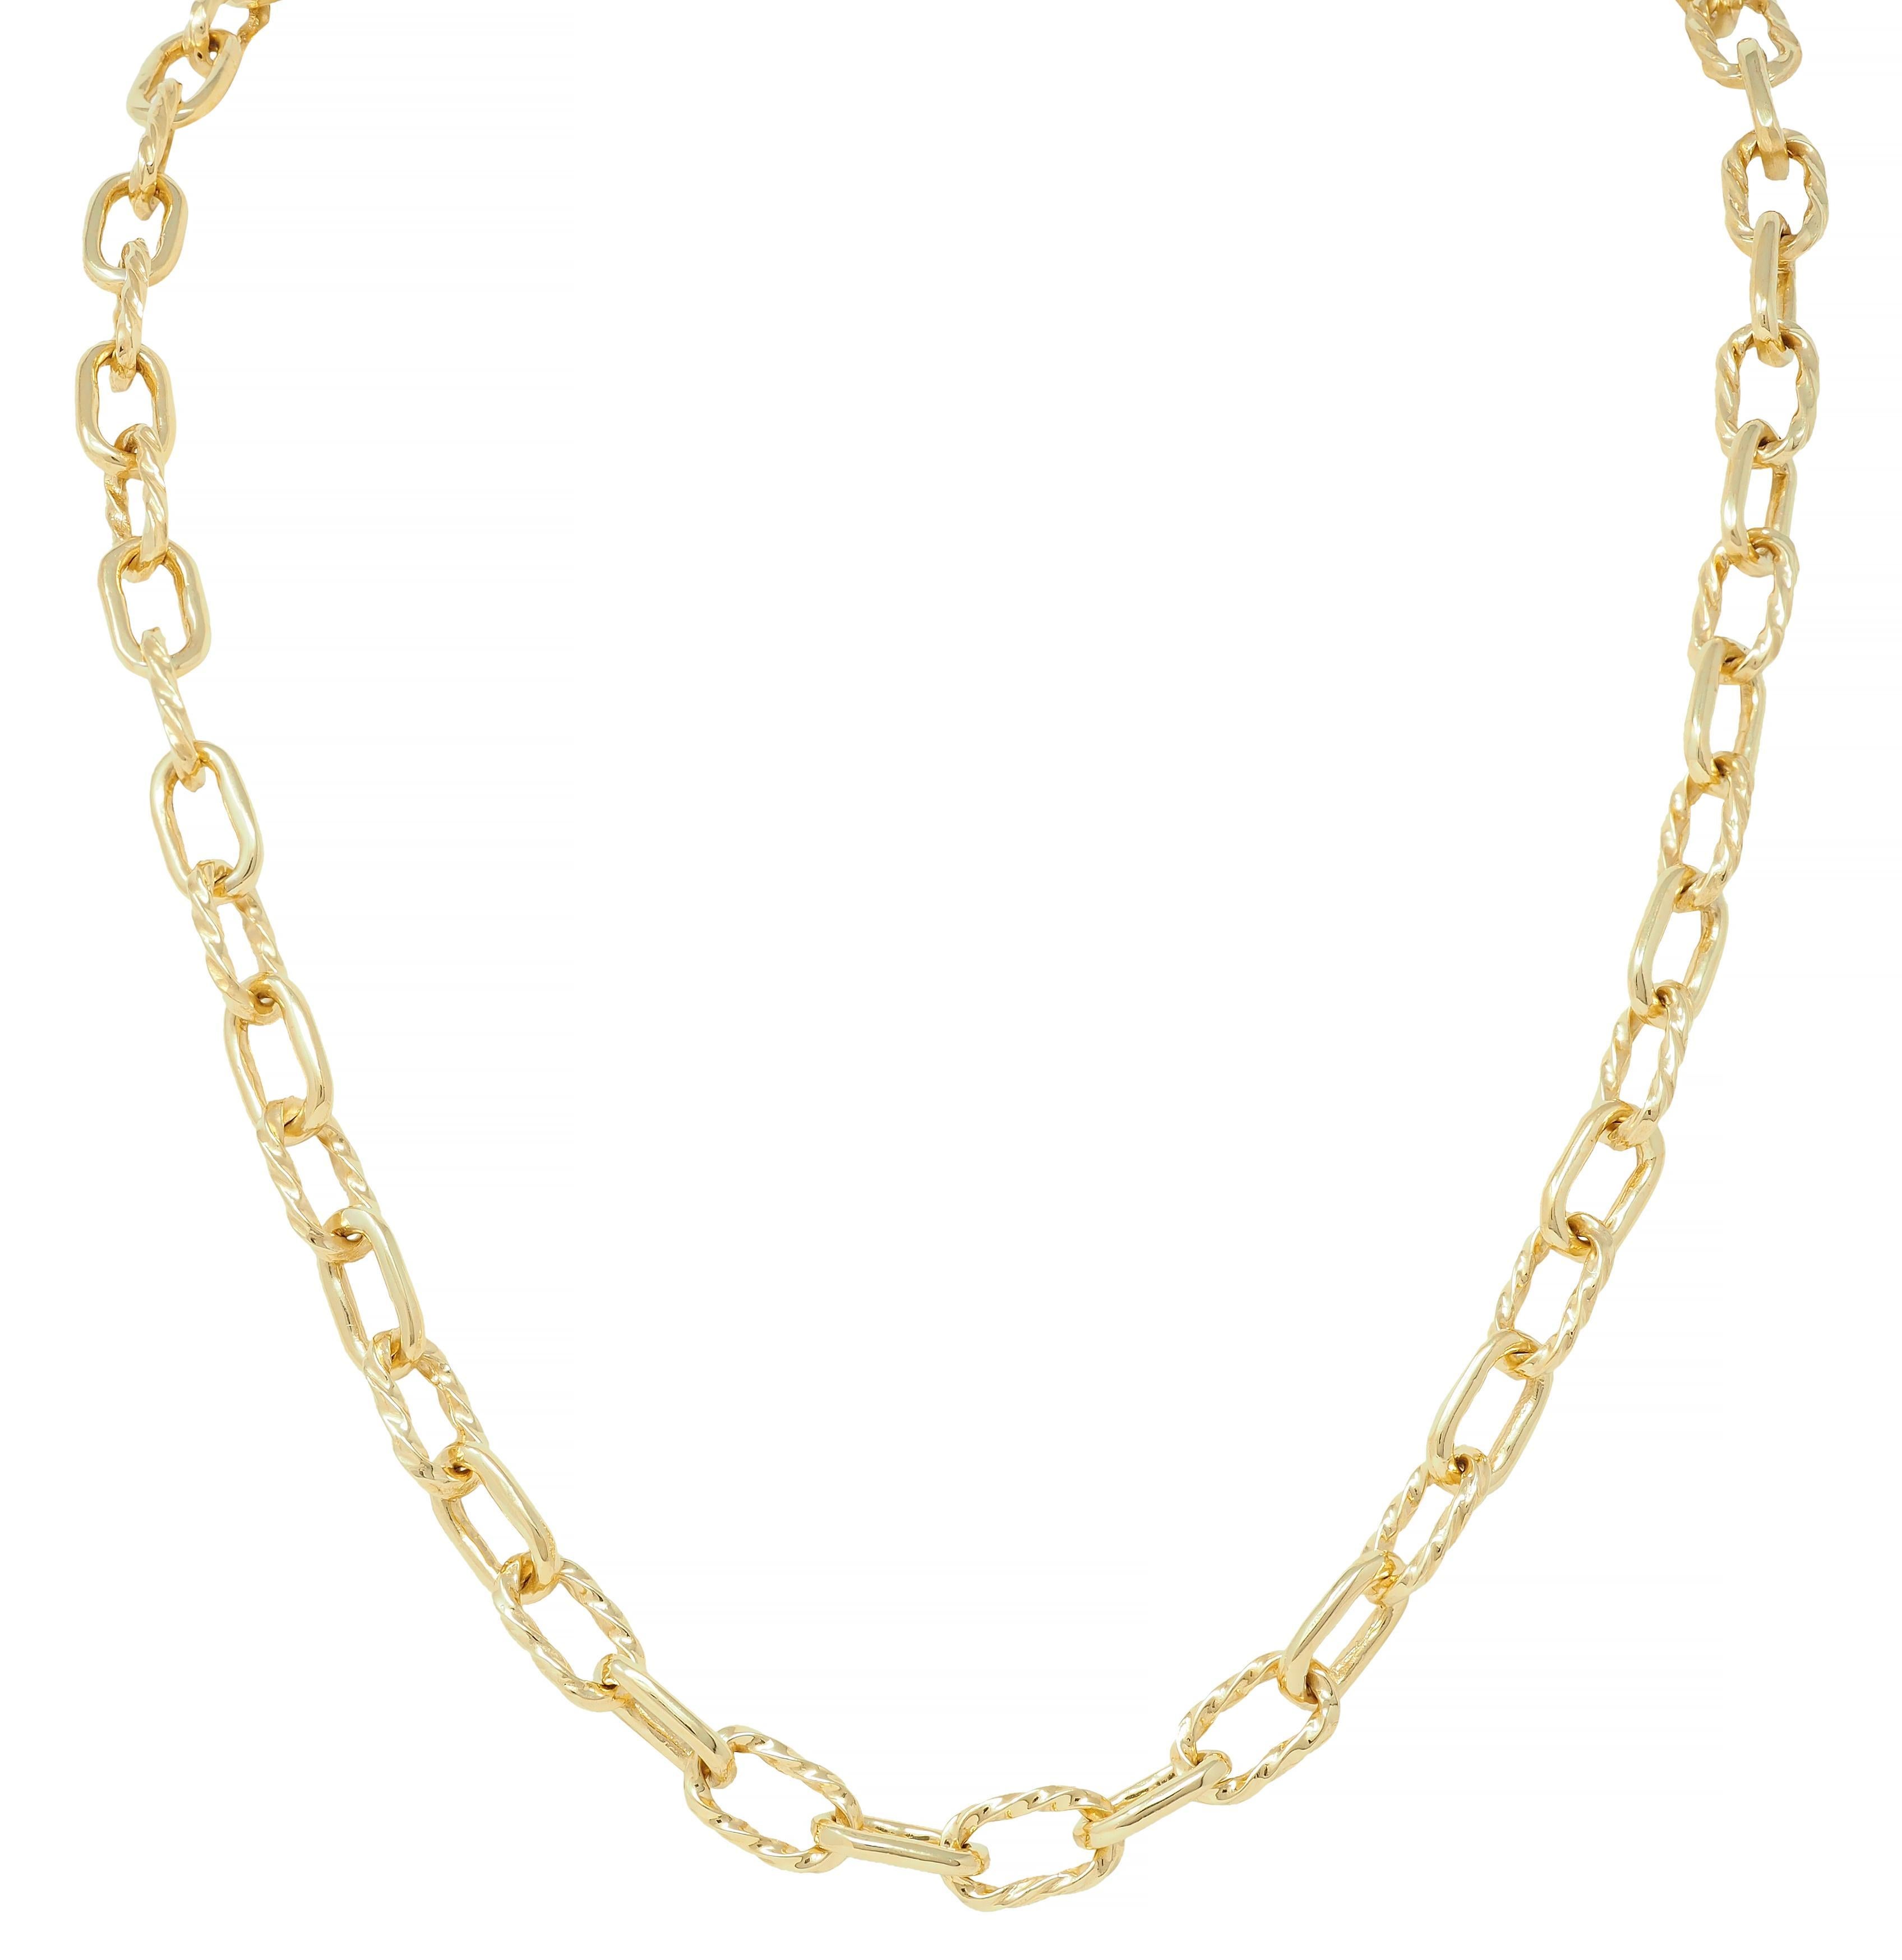 Women's or Men's 1960's 18 Karat Yellow Gold Twisted Cable Link Vintage Chain Necklace For Sale